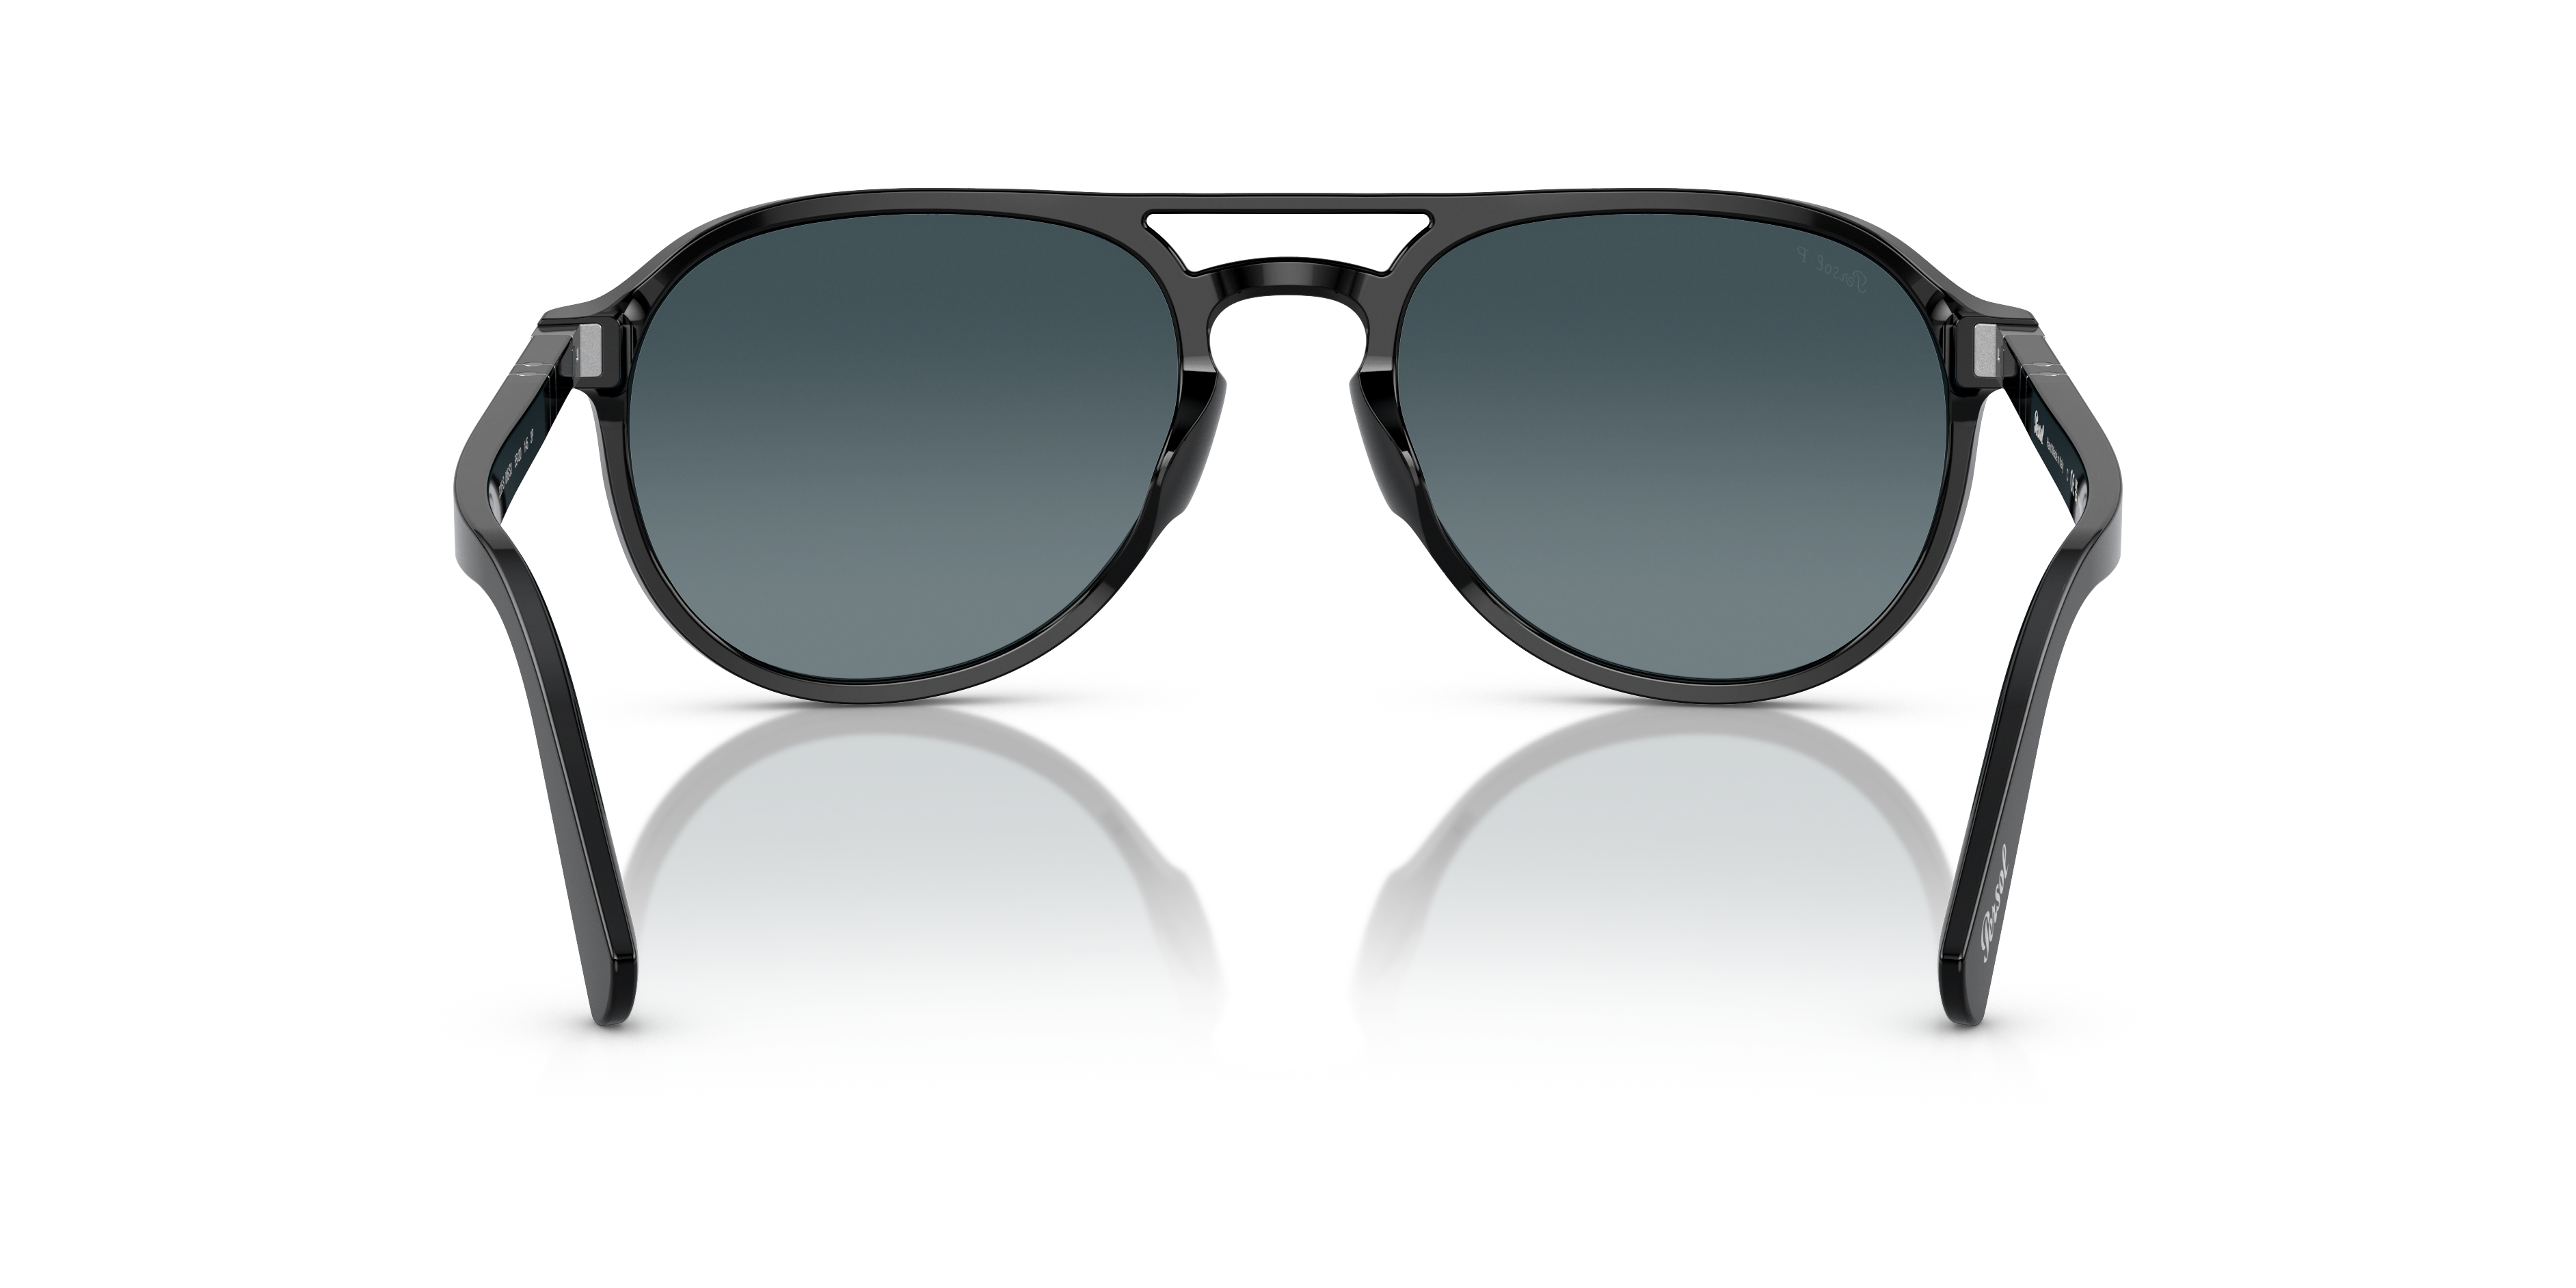 [products.image.detail02] Persol 0PO3235S 095/S3